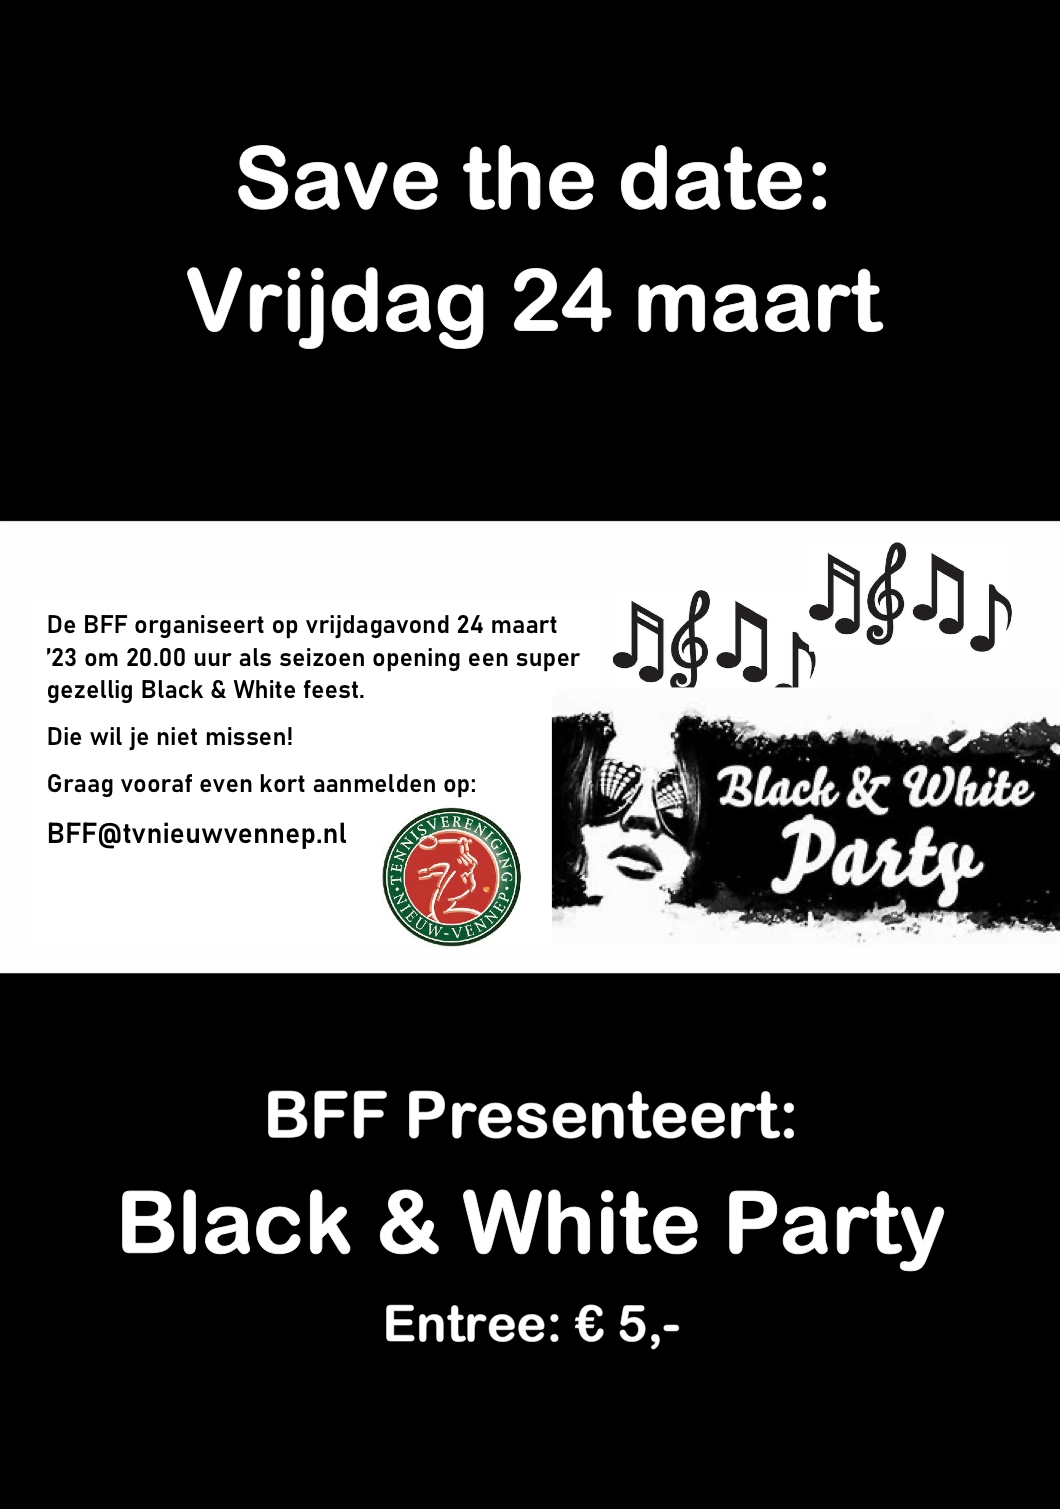 Black & White Party powered by BFF